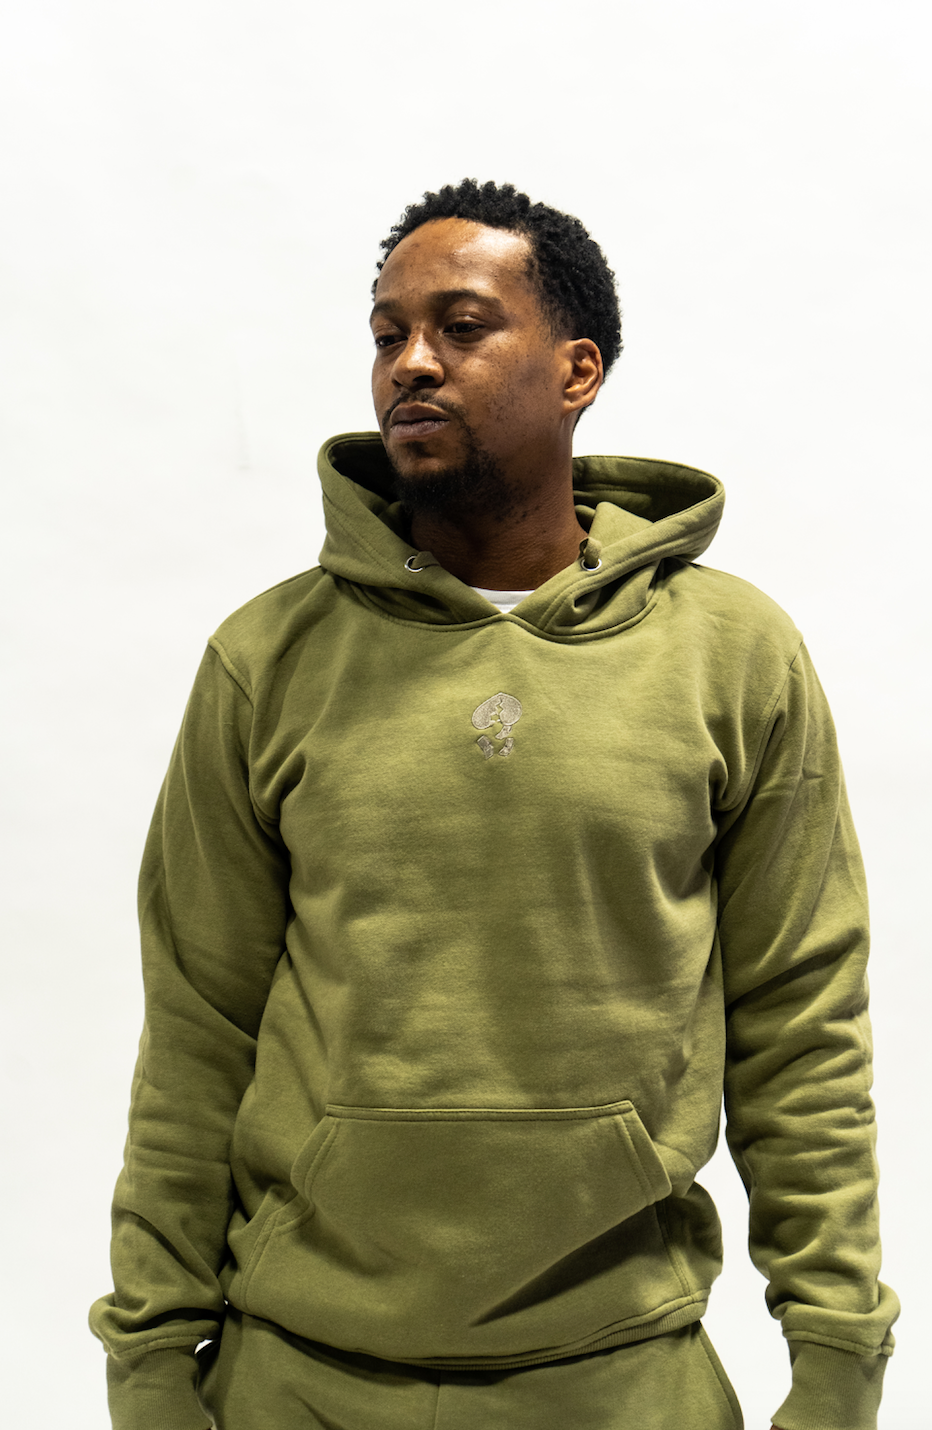 Currency Tracksuit(Olive)